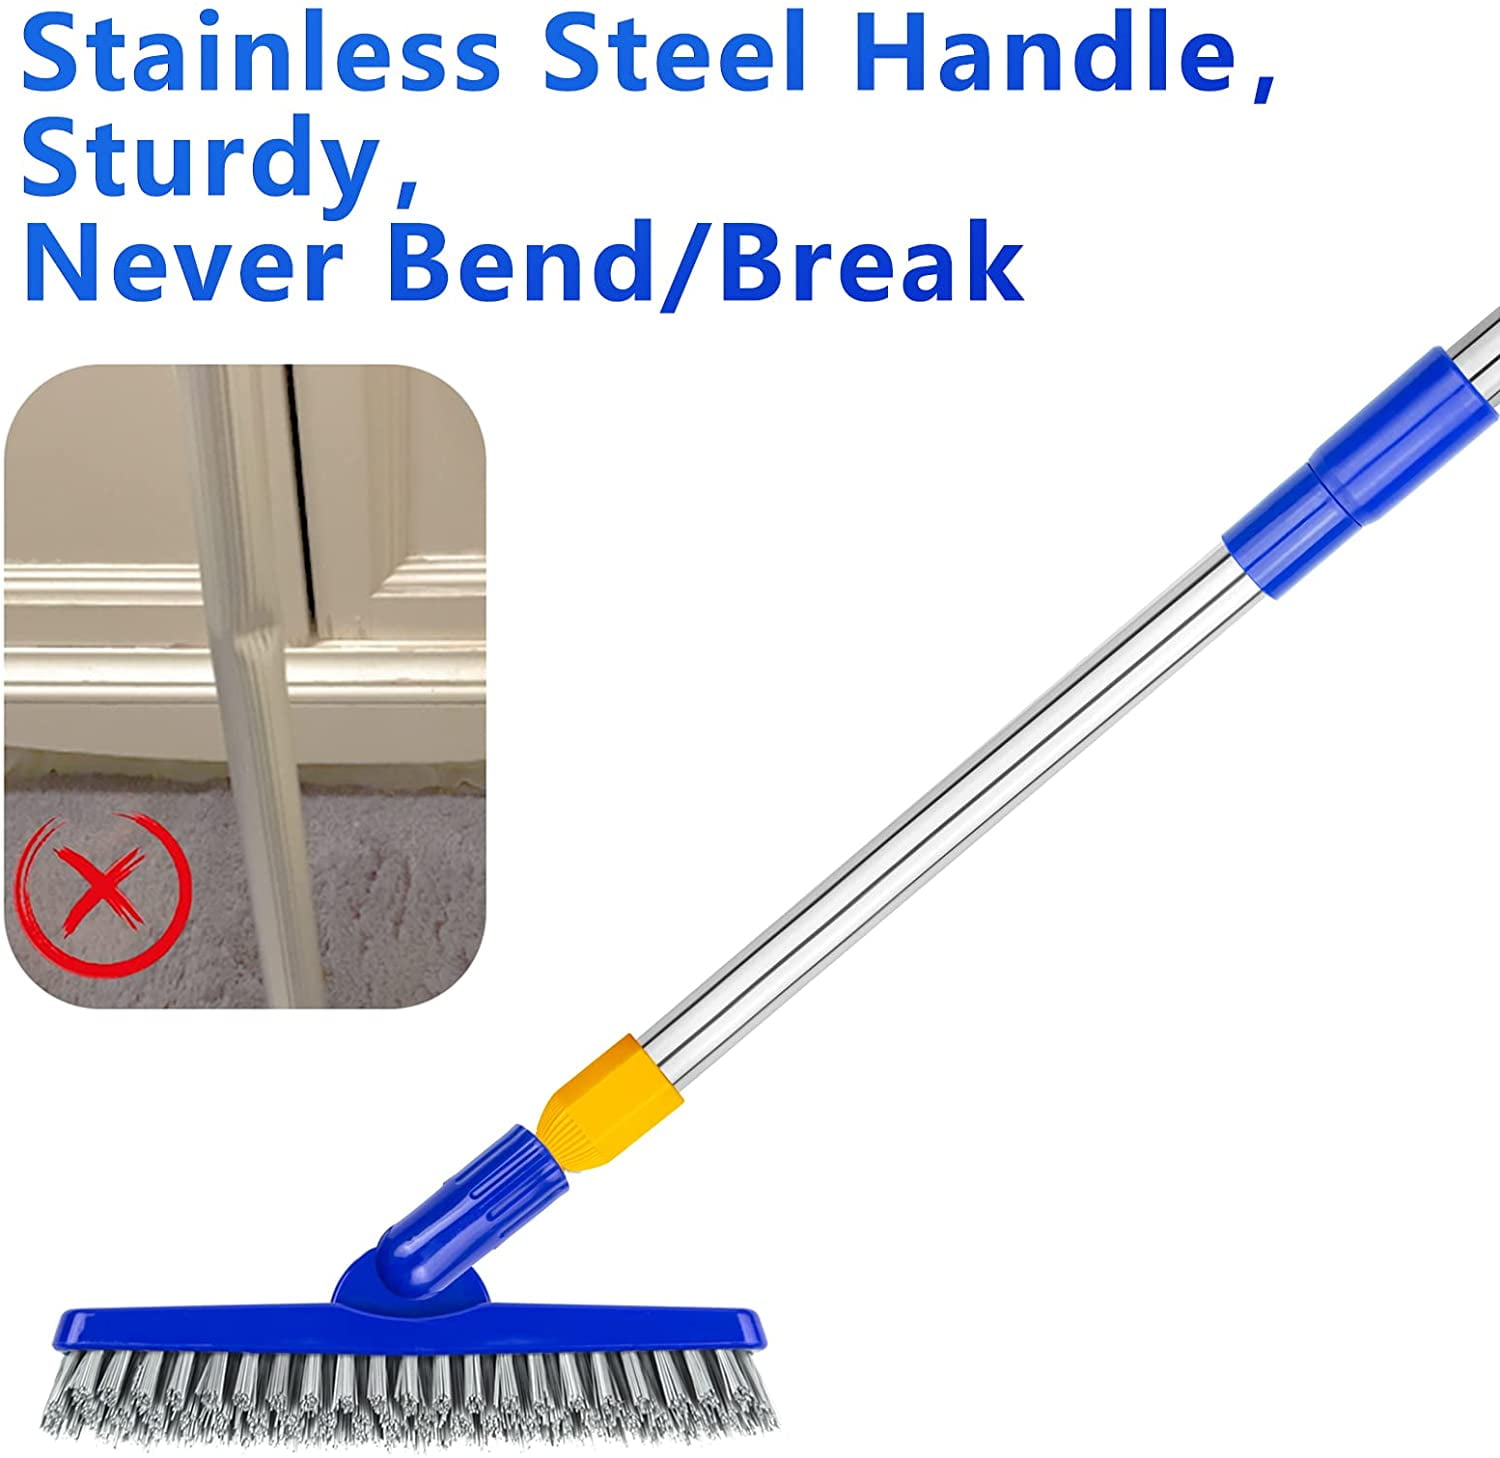 Grout Cleaner Brush with Telescopic Handle & Tough Bristles for Narrow &  Wide Kitchen Shower Tub Tile Surfaces - by ELITRA HOME,Swivel Grout Scrubber